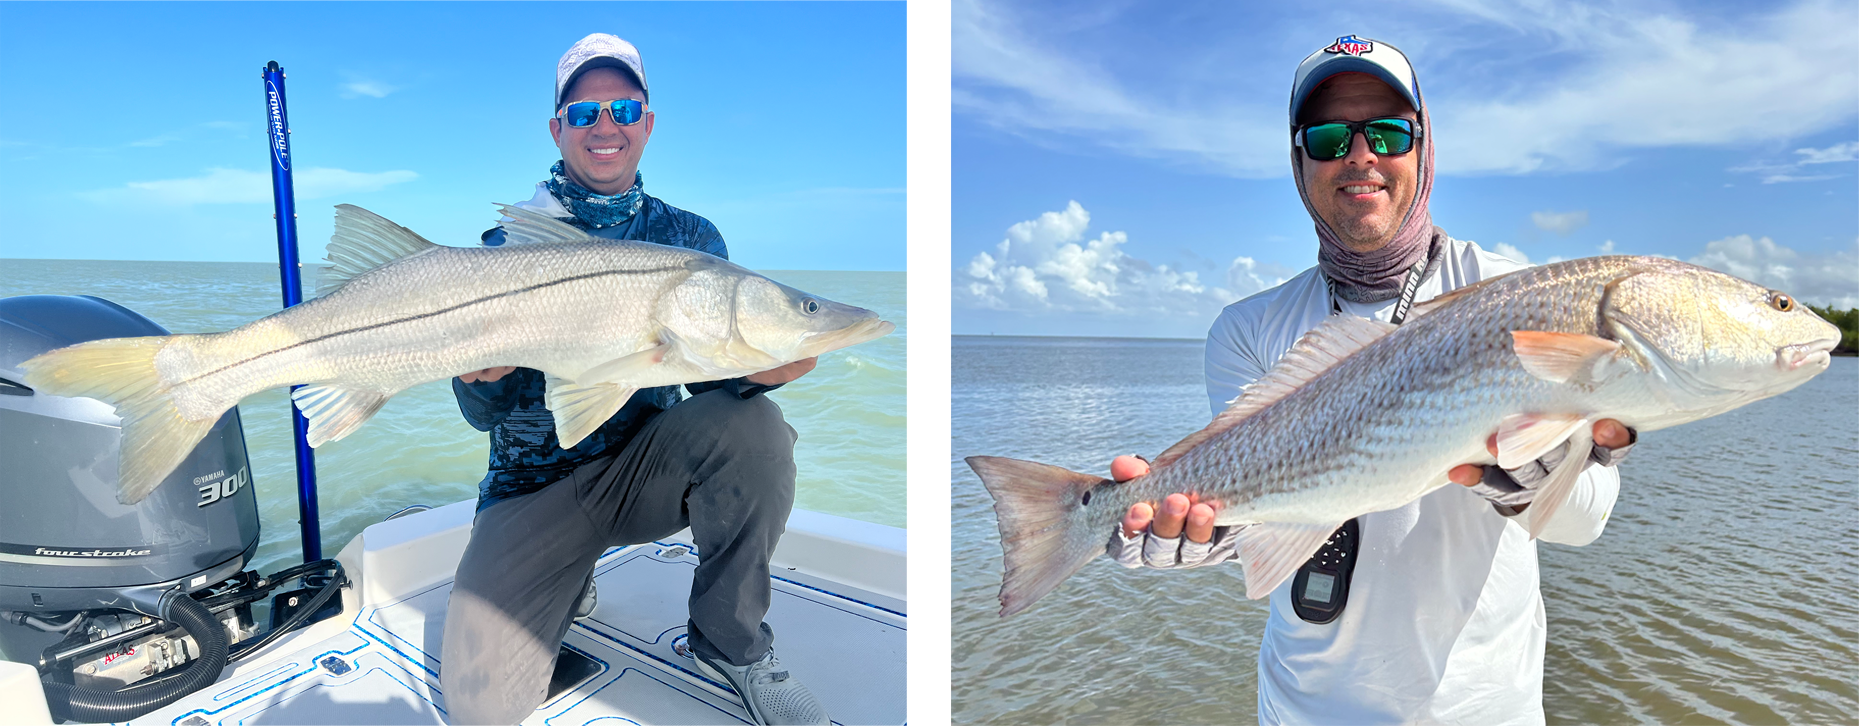 Redfish and Snook caught in Everglades National Park during the Friendly Flamingo Tournament